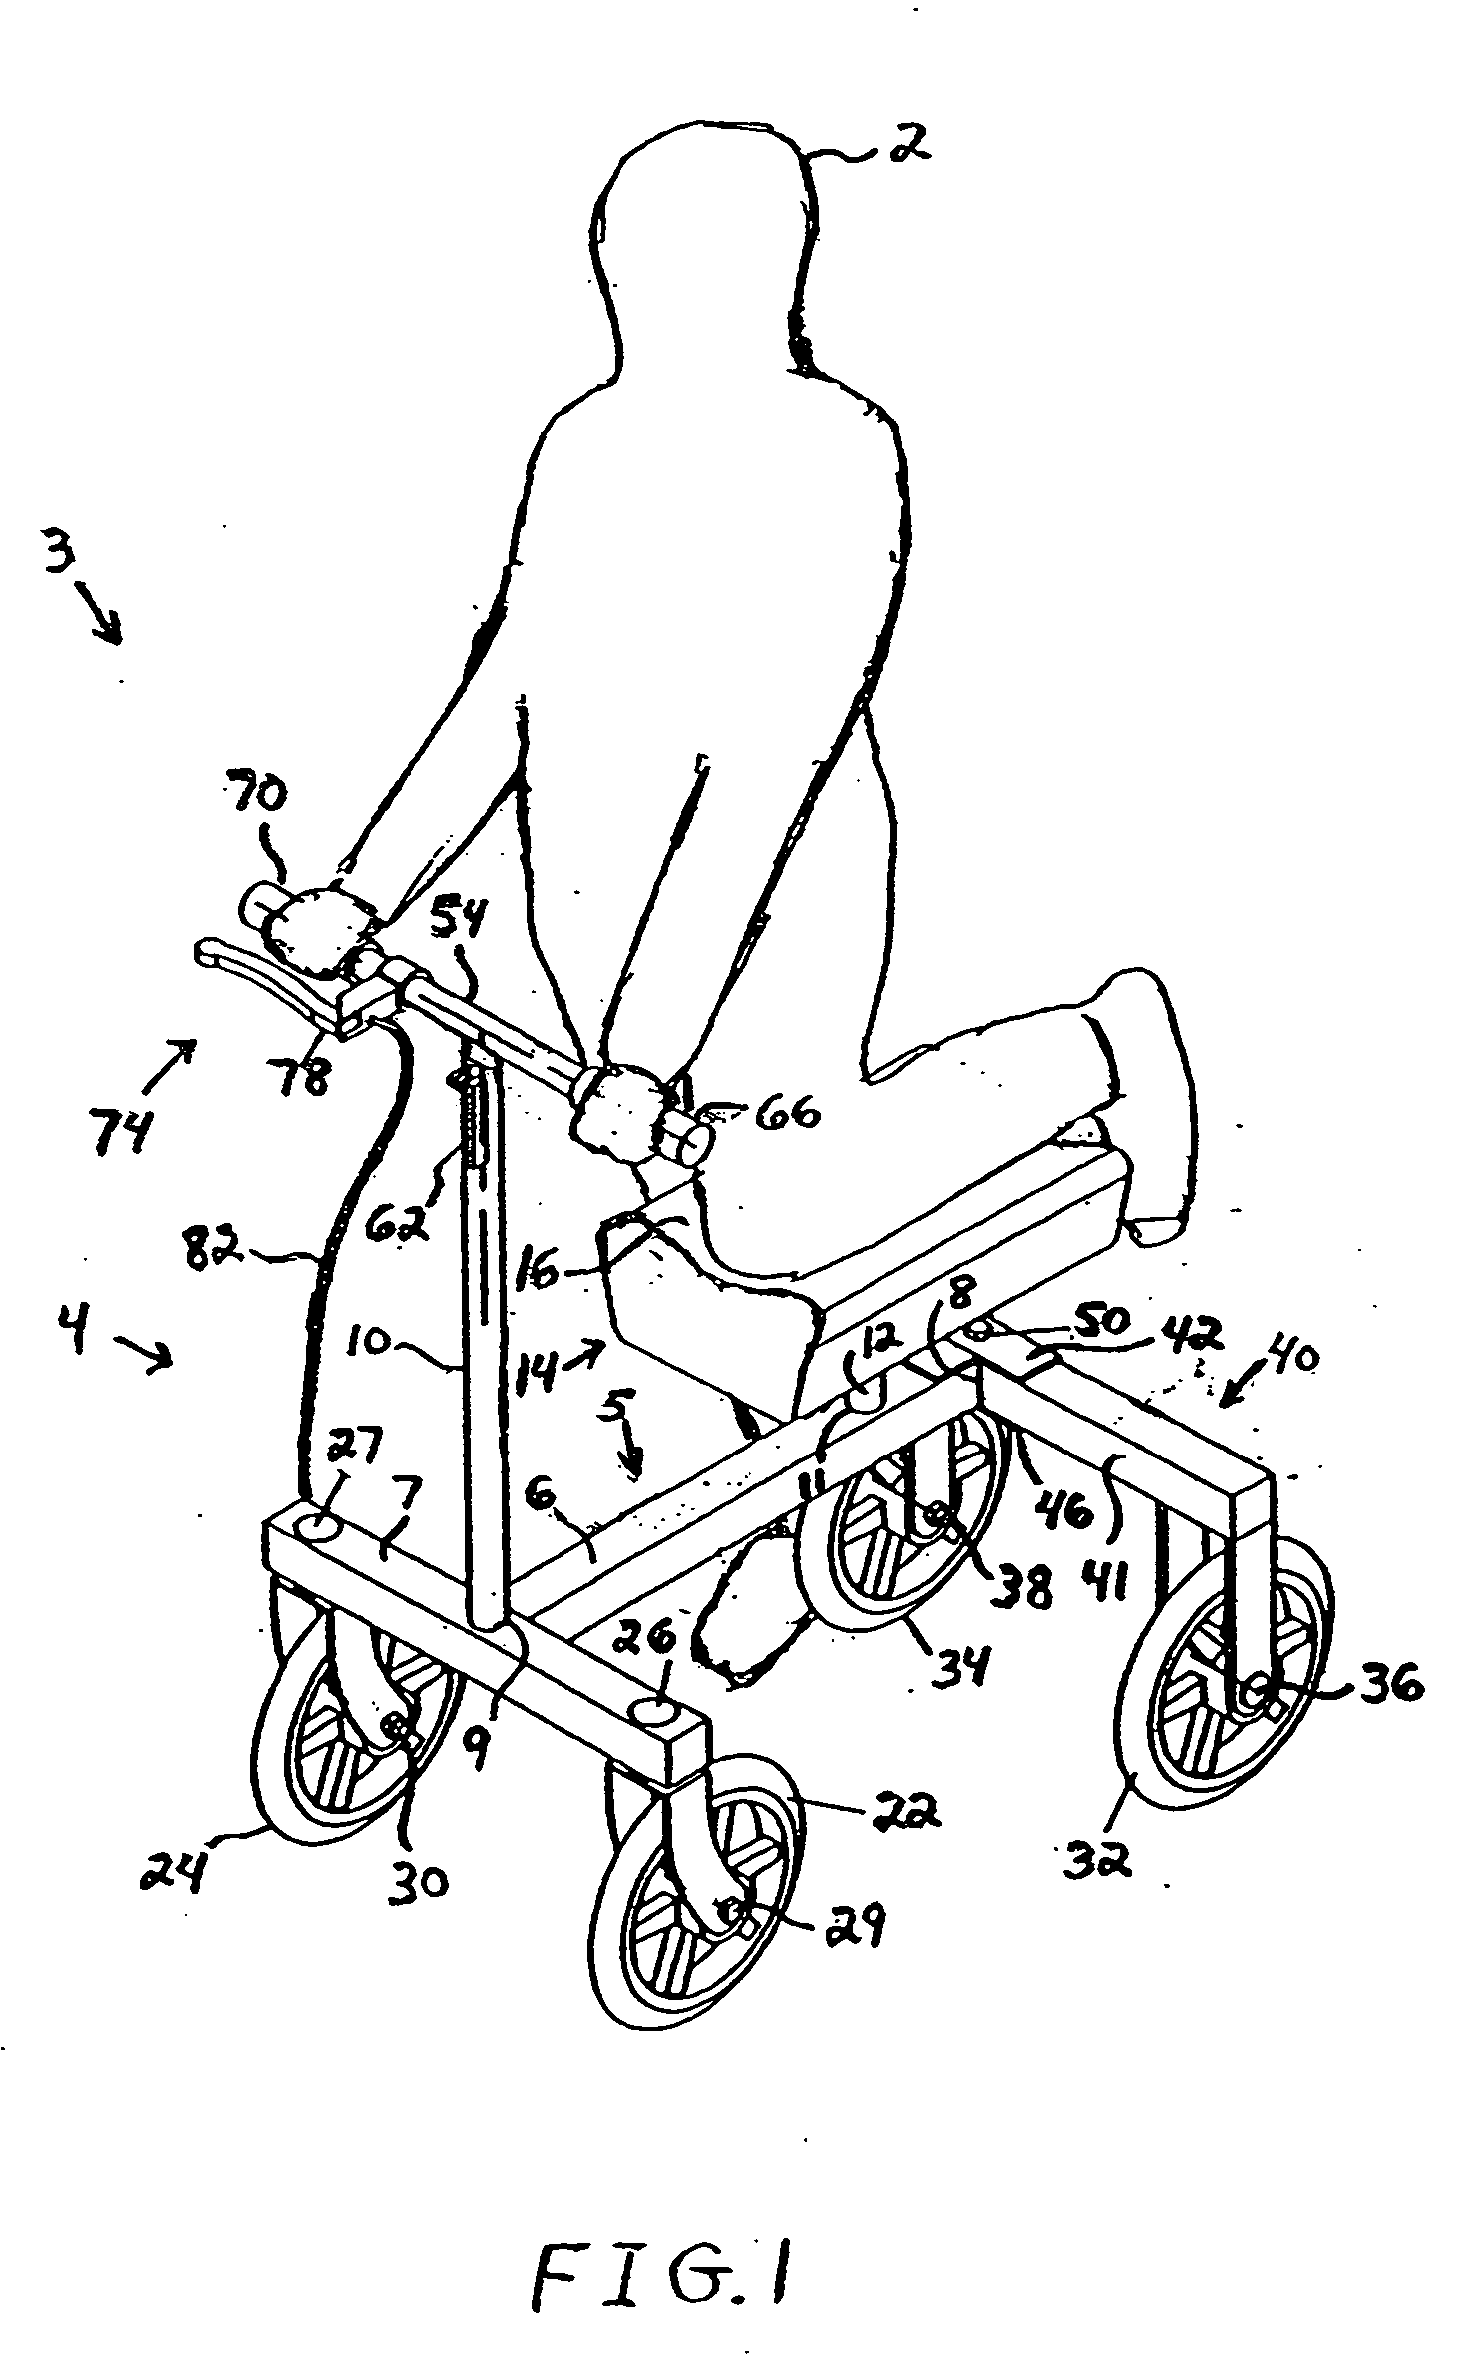 Cart for injured person